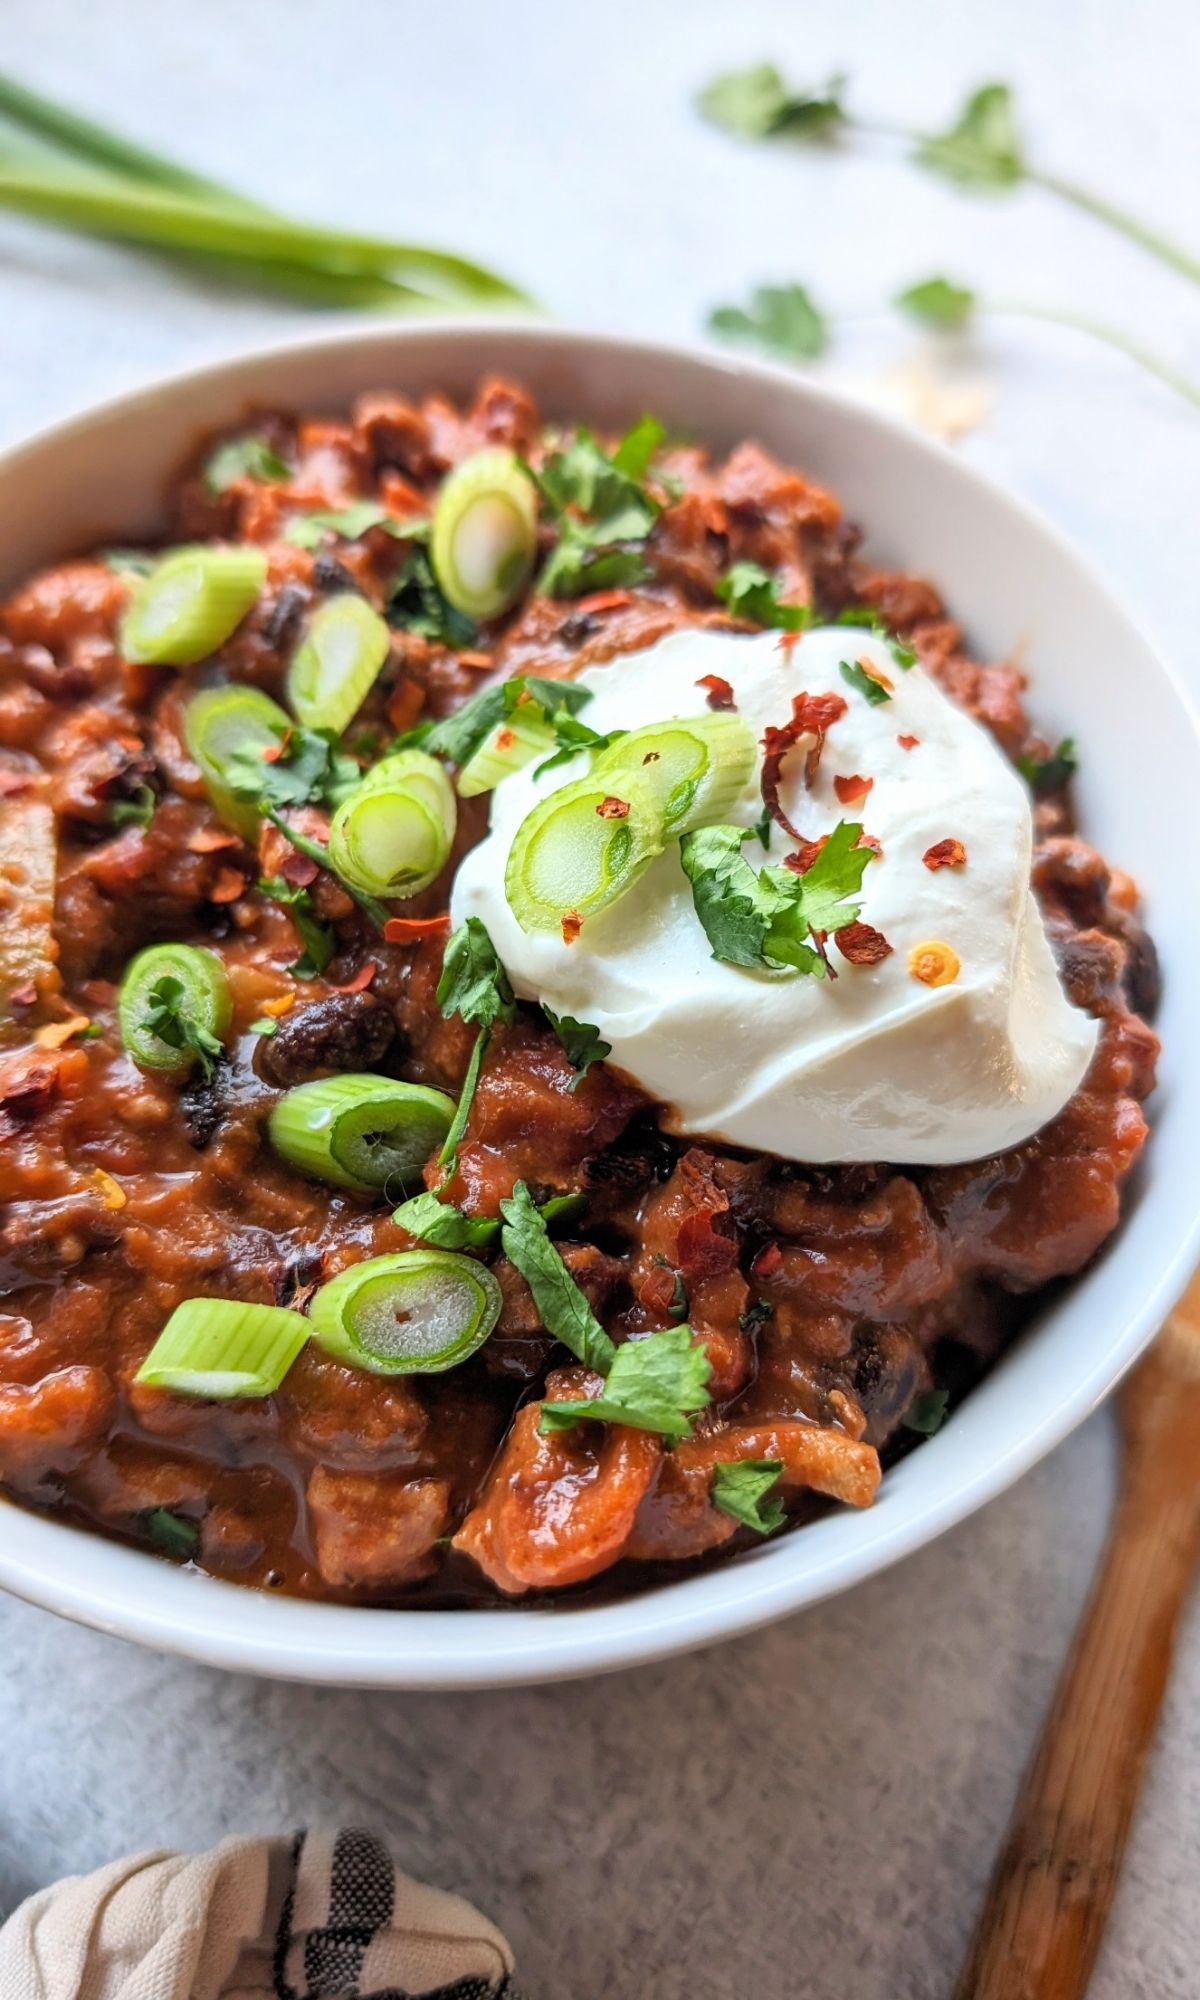 dash diet chili recipe easy low salt chili recipe with sour cream green onions lean low fat ground turkey breast meat and no salt added beans